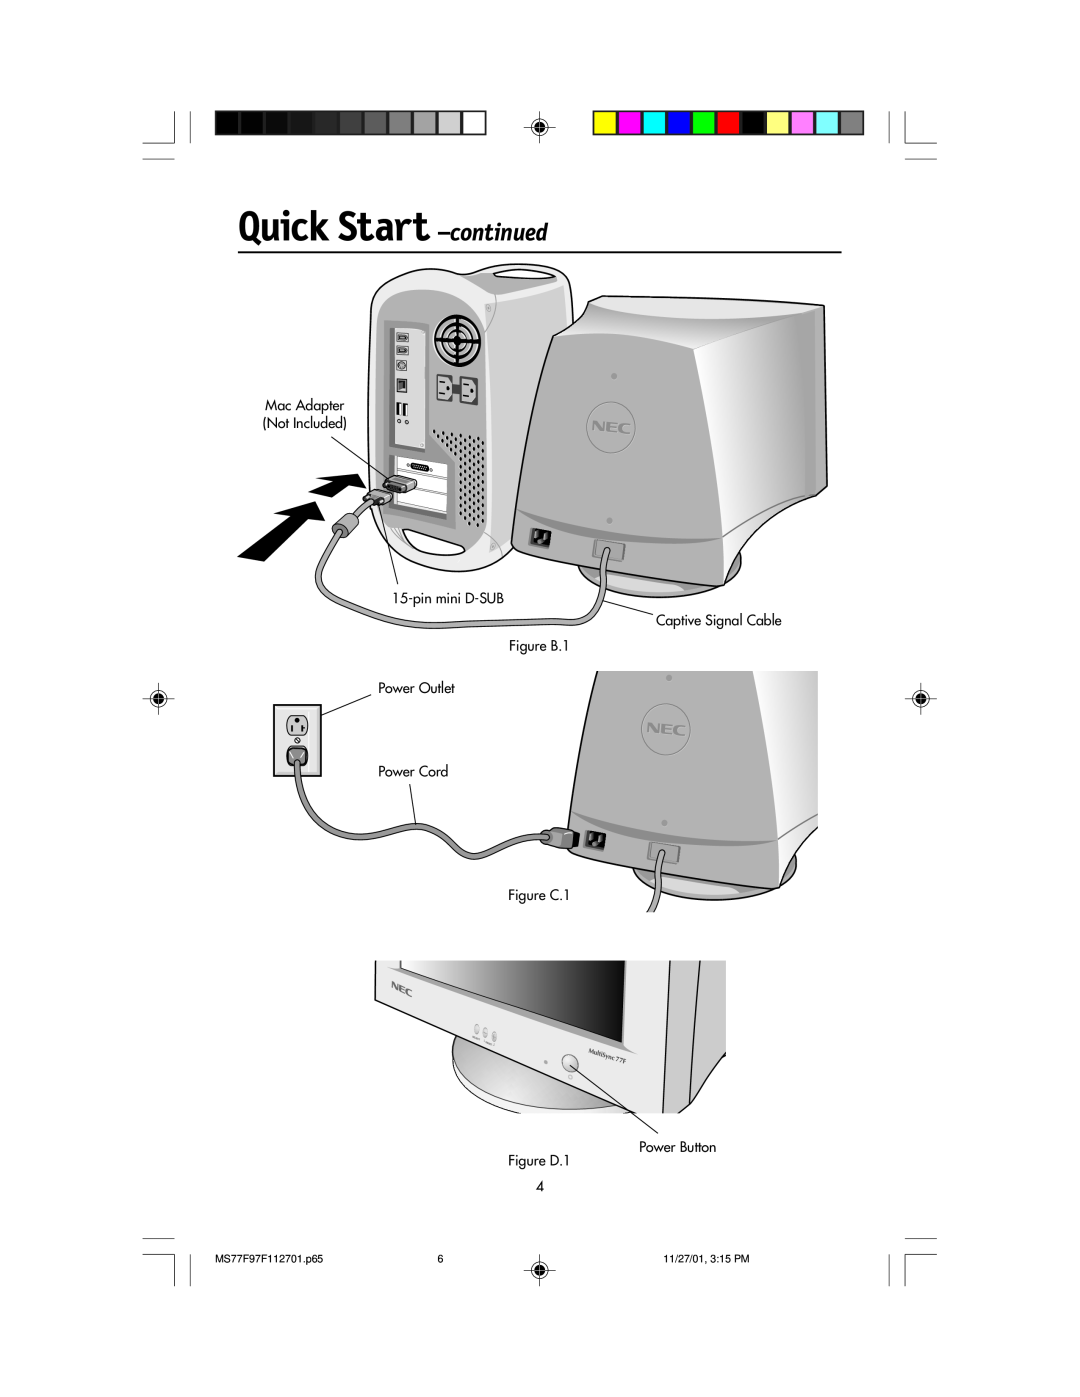 NEC manual Quick Start -continued, Mac Adapter Not Included 15-pin mini D-SUB Captive Signal Cable, MS77F97F112701.p65 